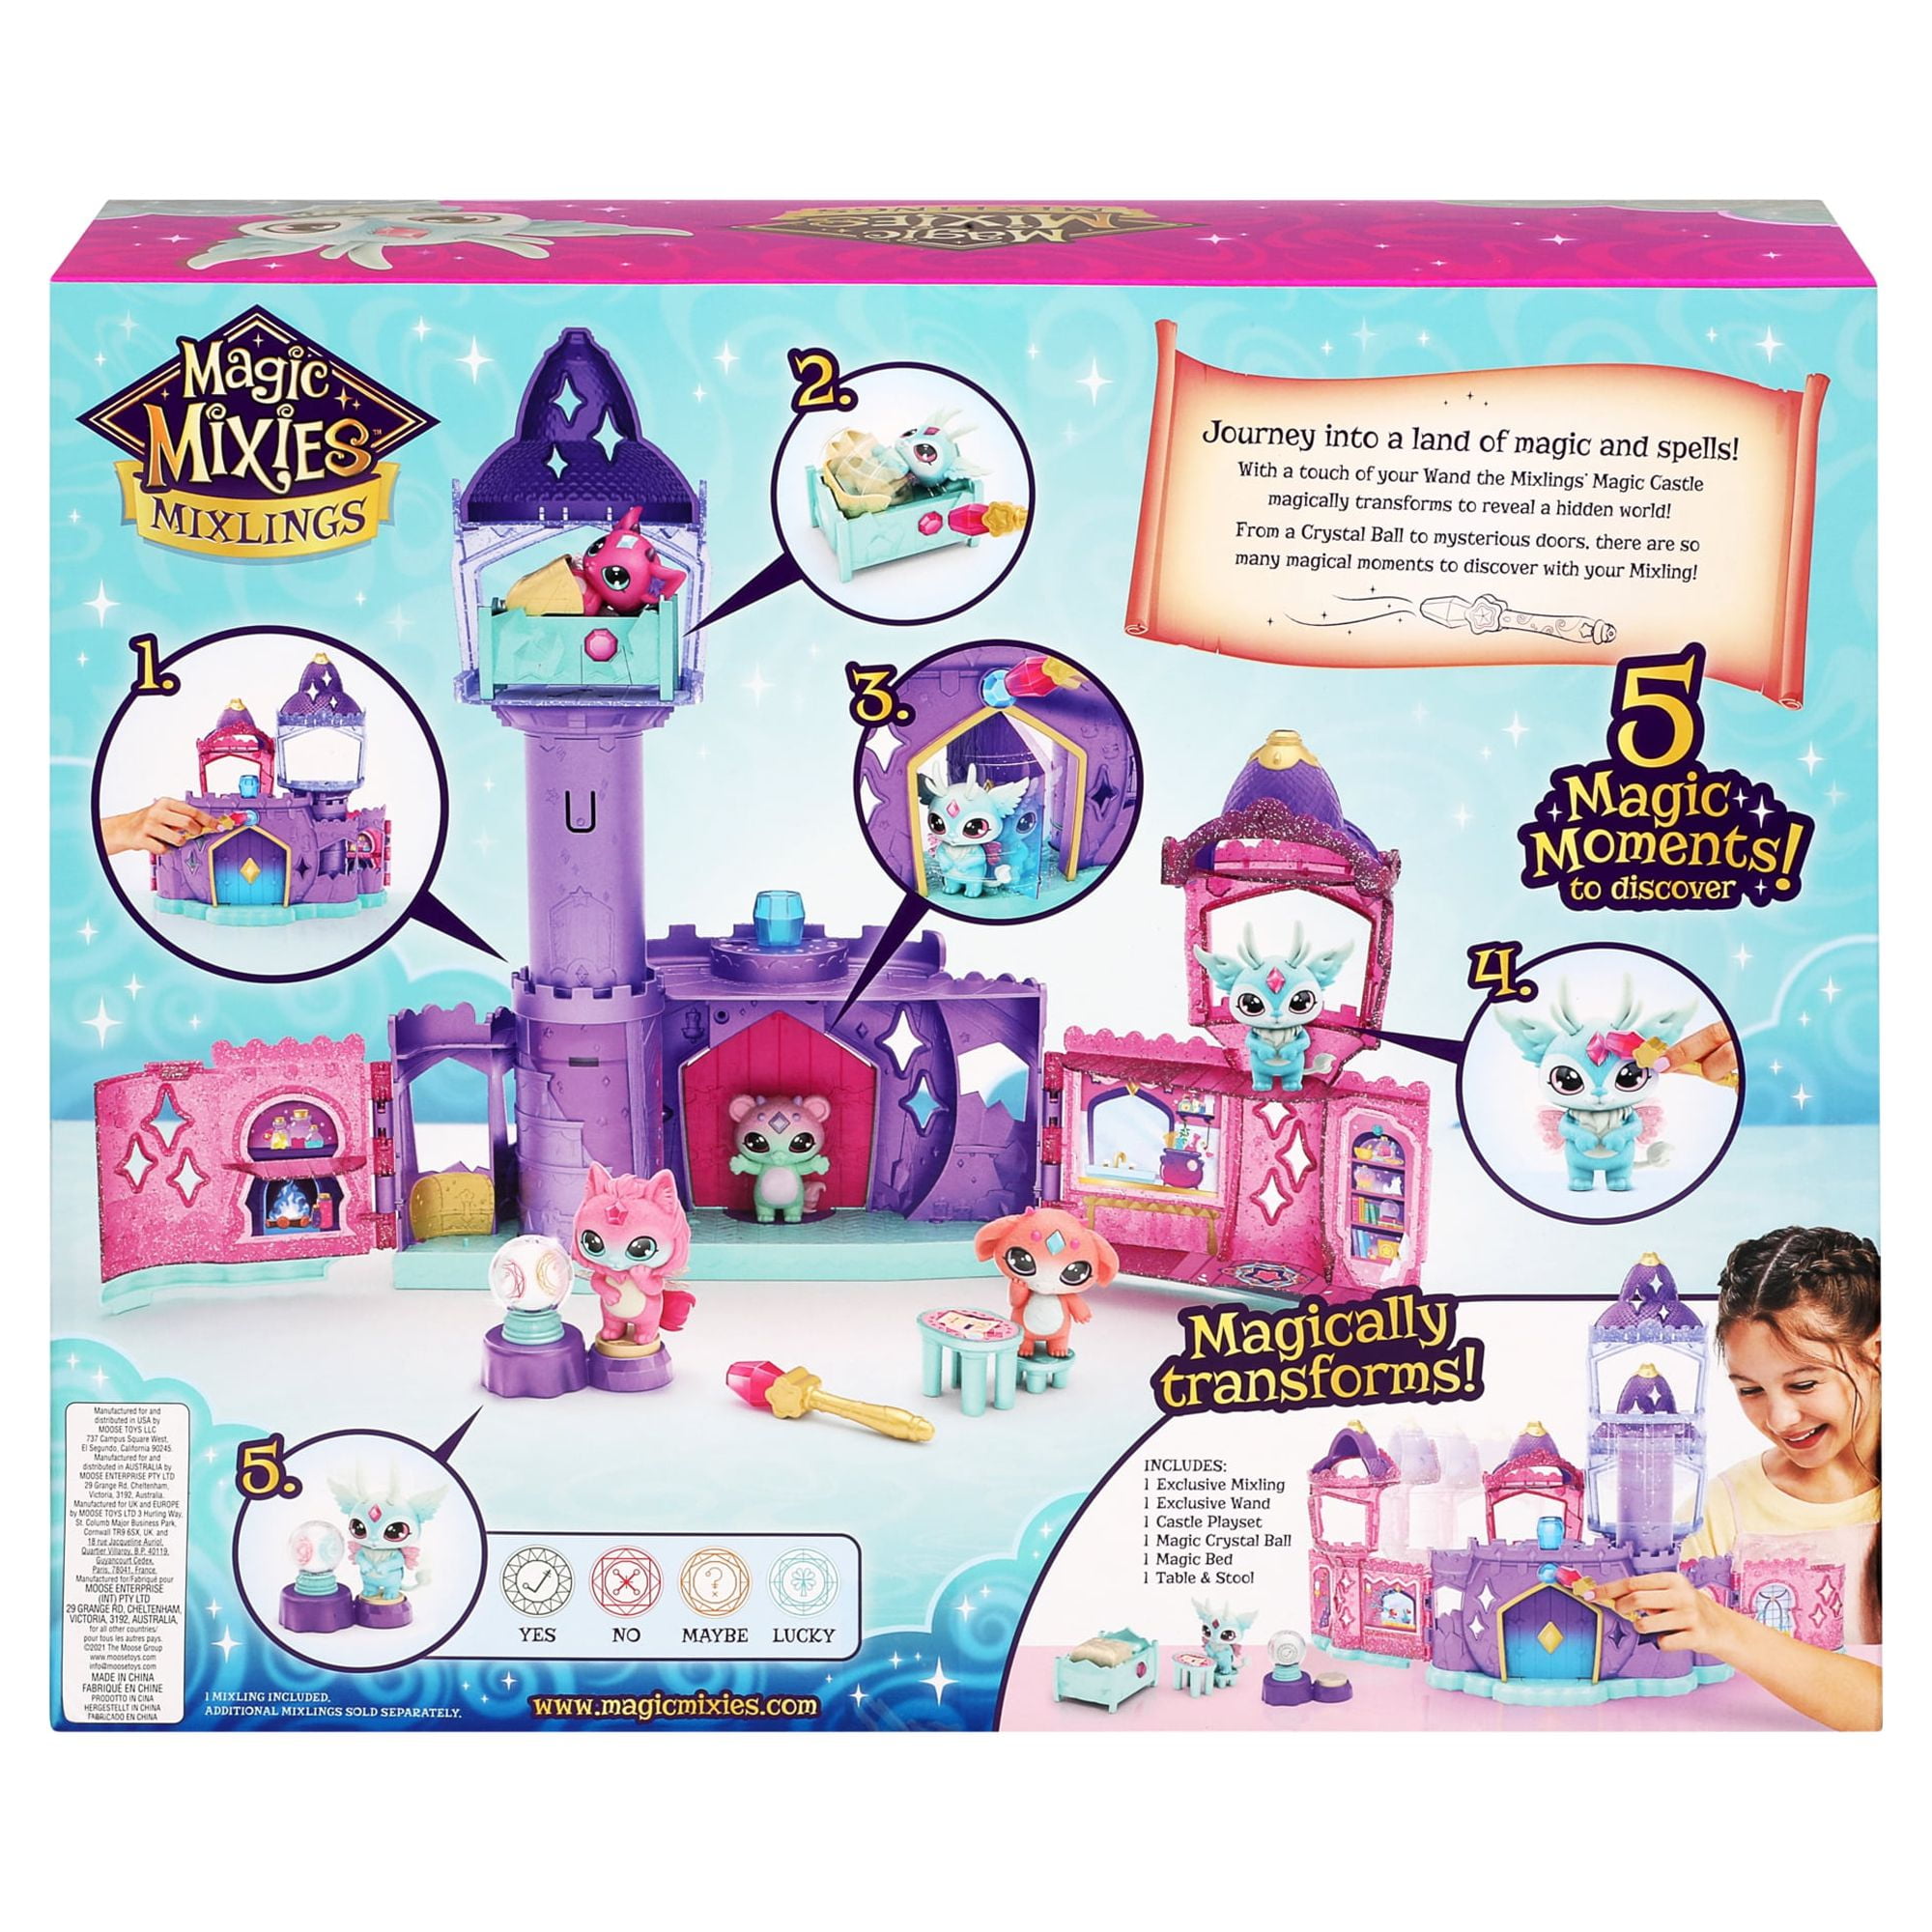 Magic Mixies Mixlings Magic Castle, Expanding Playset with Wand That  Reveals 5 Magic Moments, for Kids Aged 5 and Up